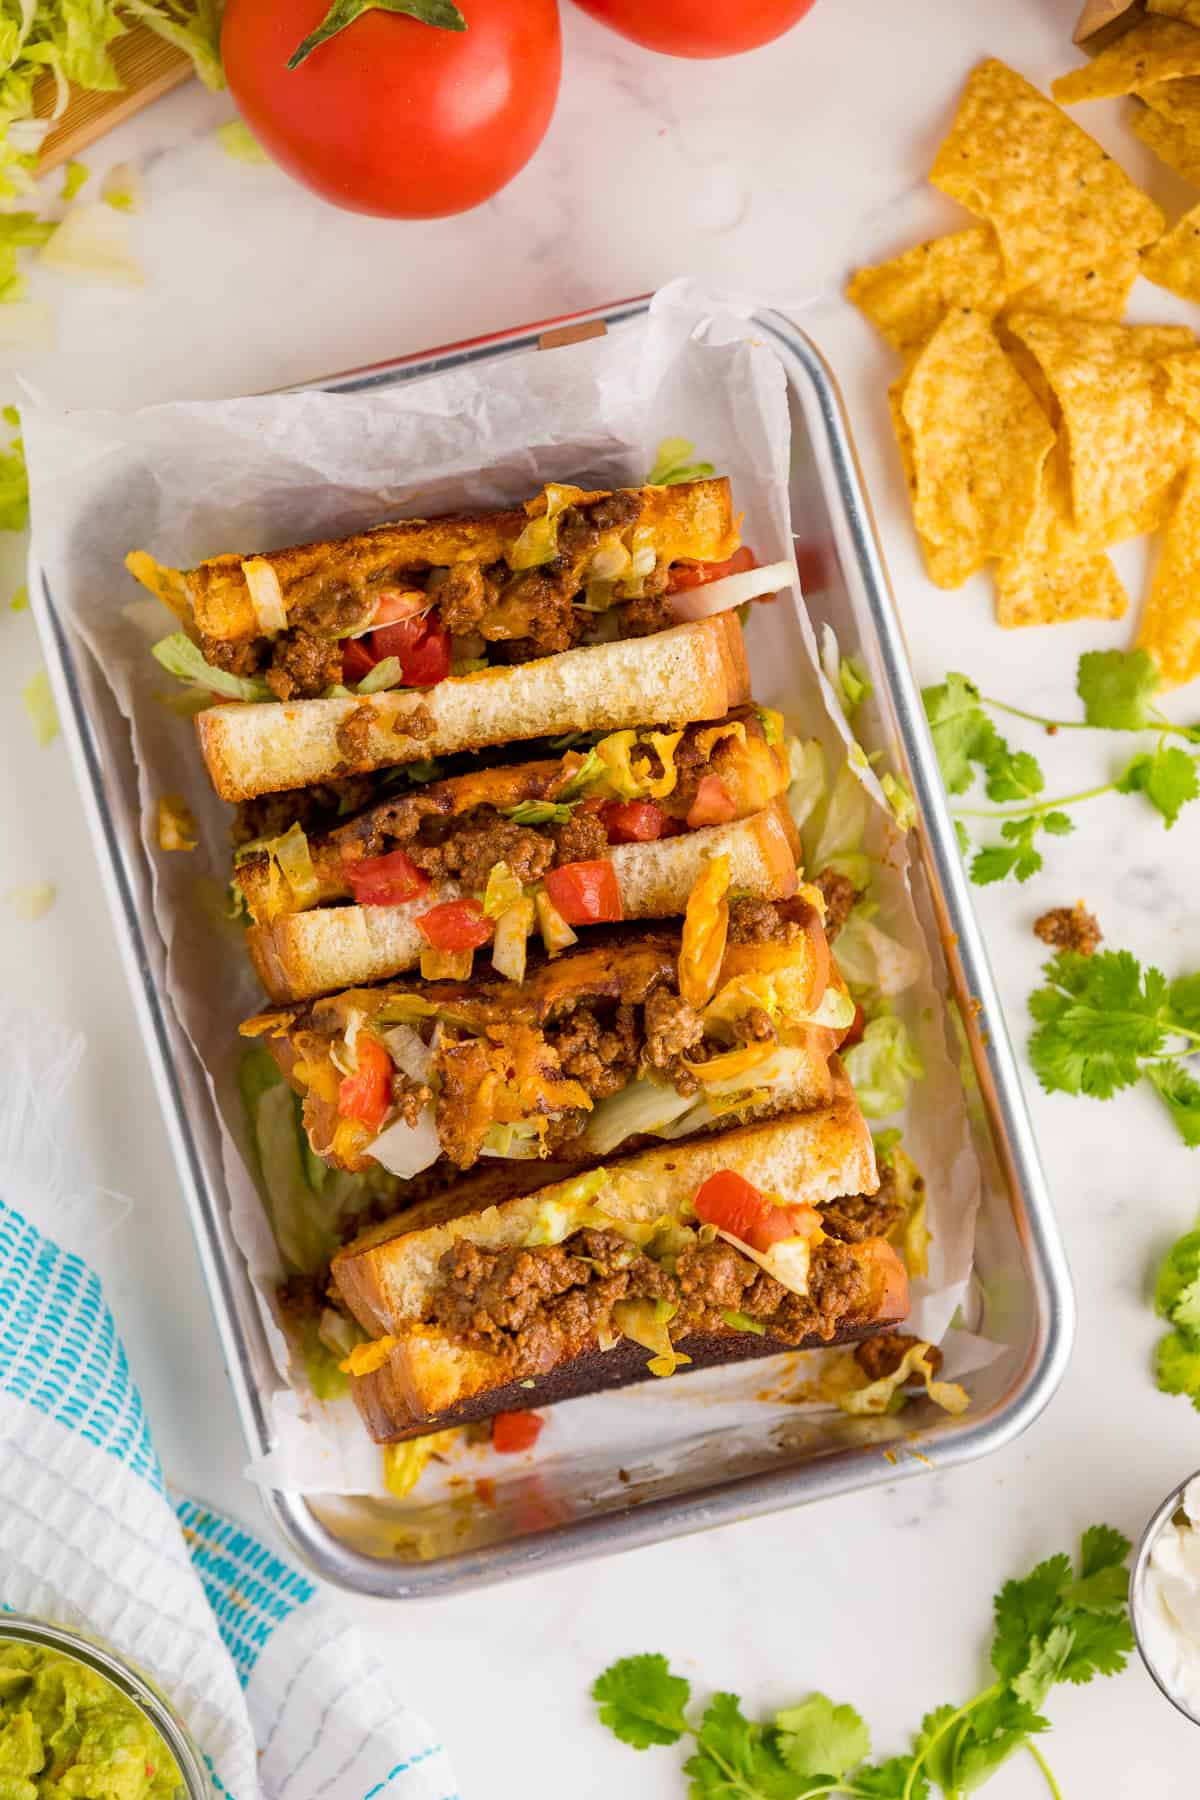 Taco grilled cheese sandwiches on a platter.